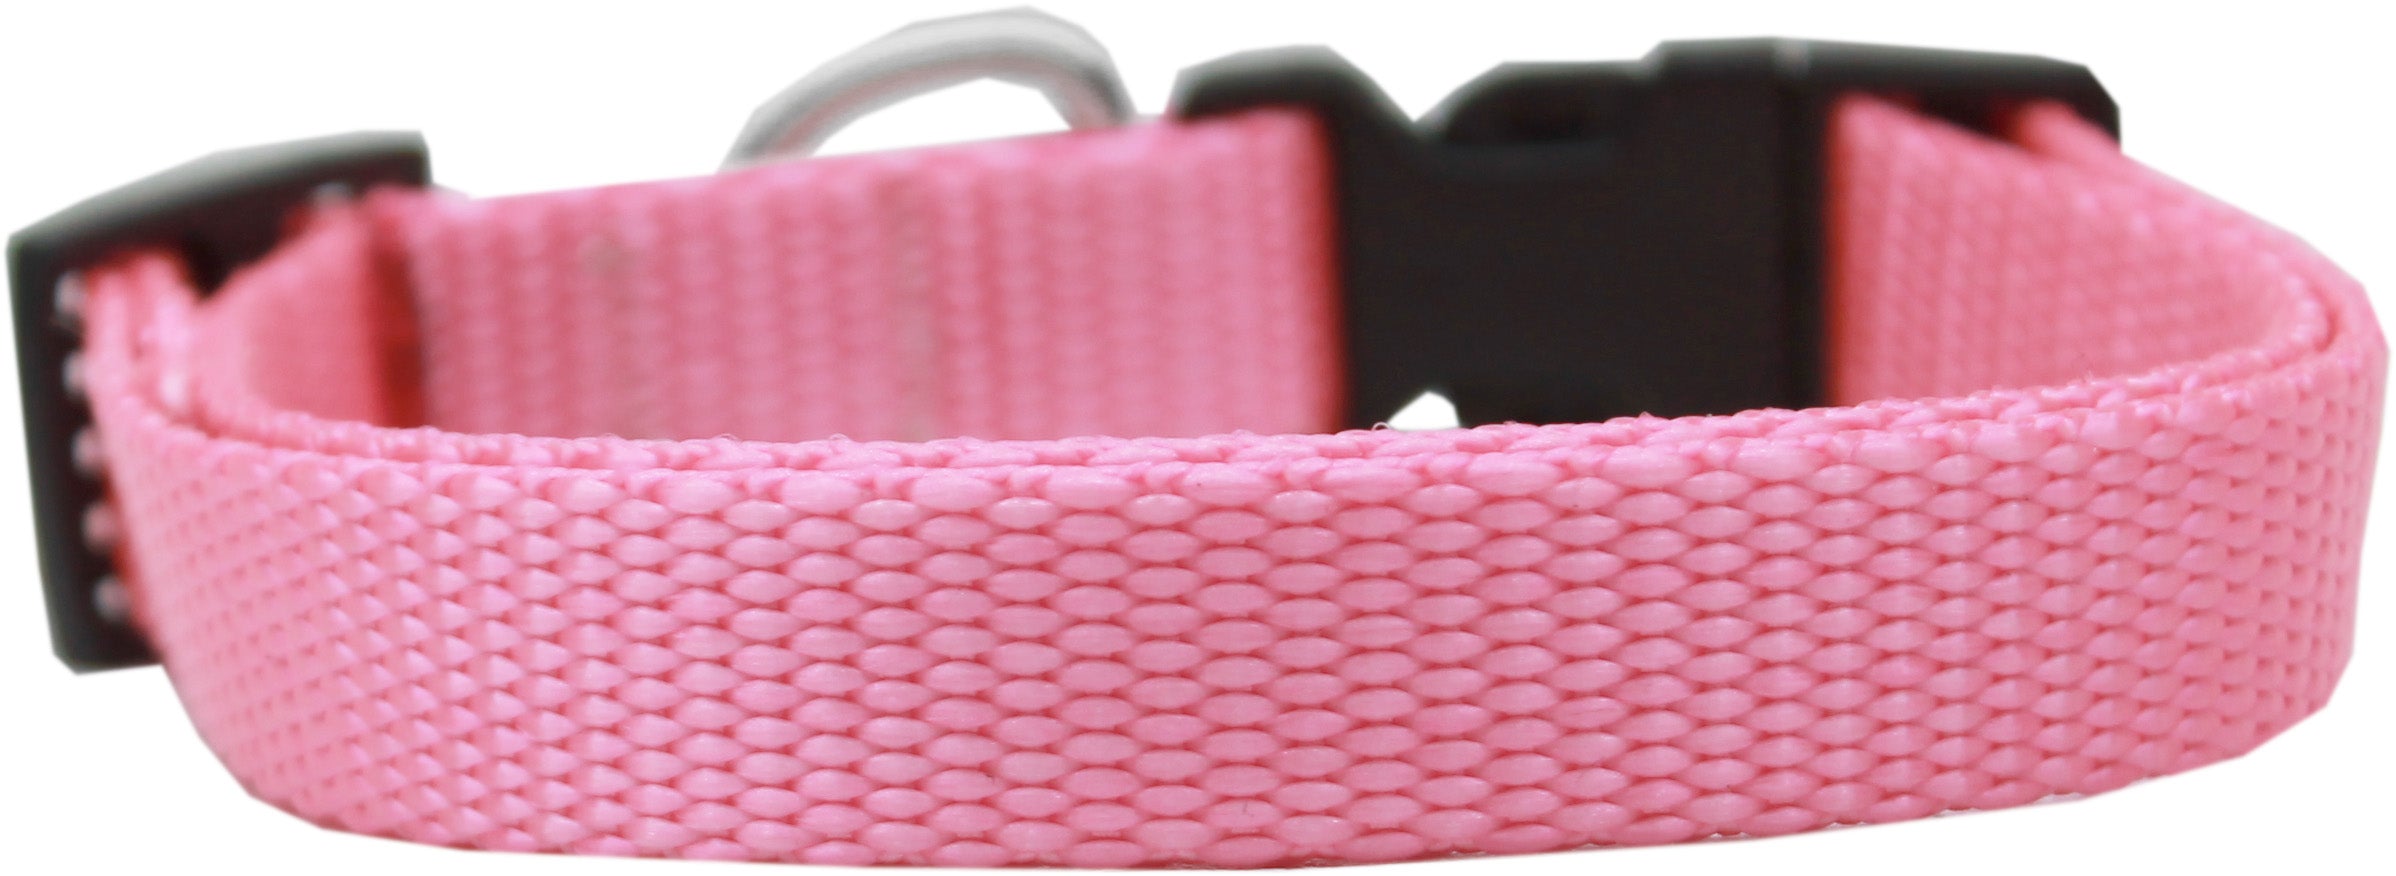 Solid Color Nylon Dog Collar - staygoldendoodle.com